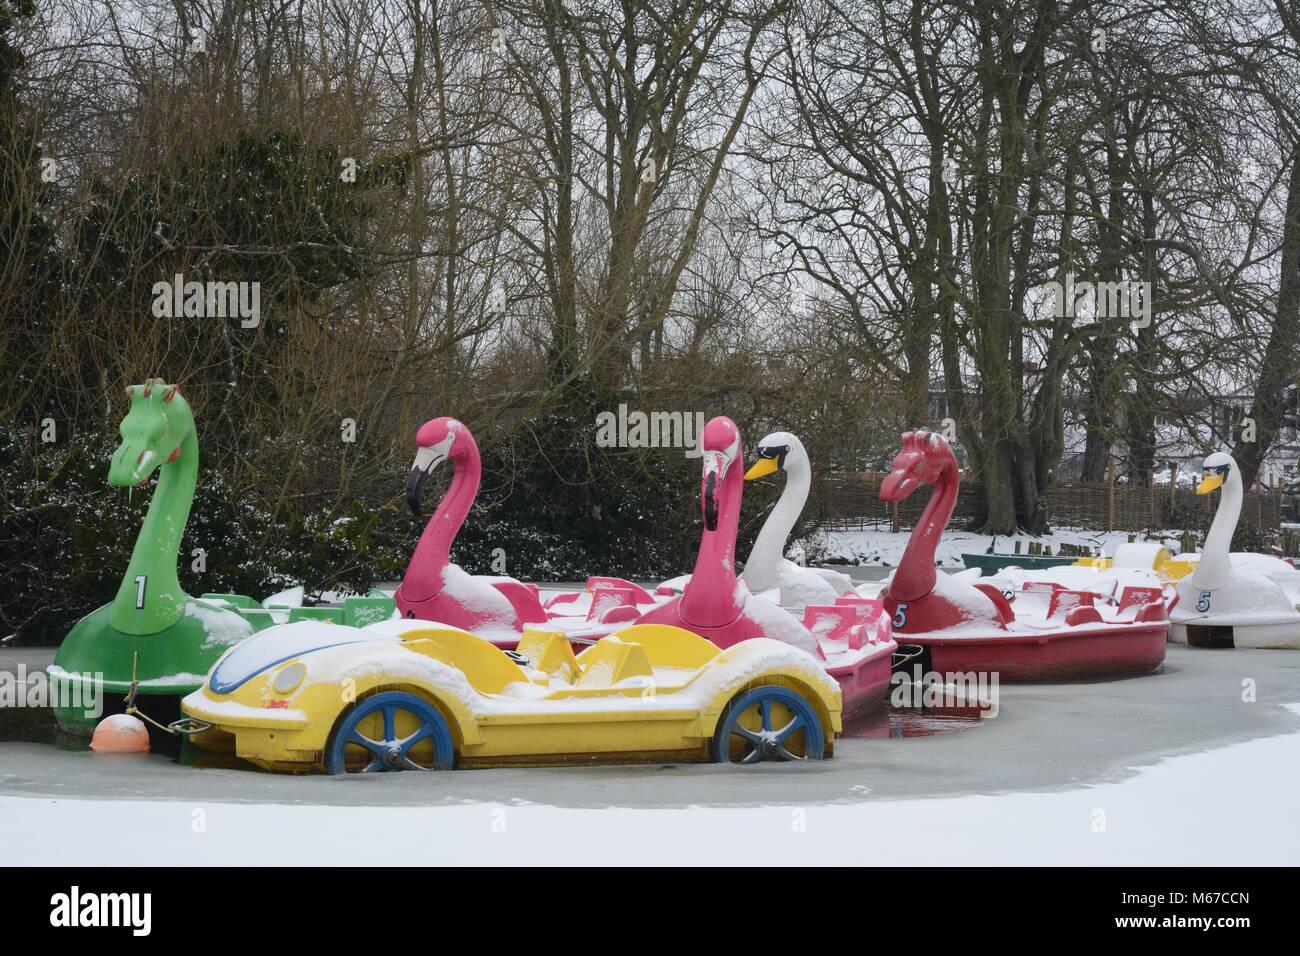 Novelty pedalos in the shape of cars, swans, dragons and flamingos are frozen in during a winter cold snap at Alexandra Palace Park, London, UK Stock Photo